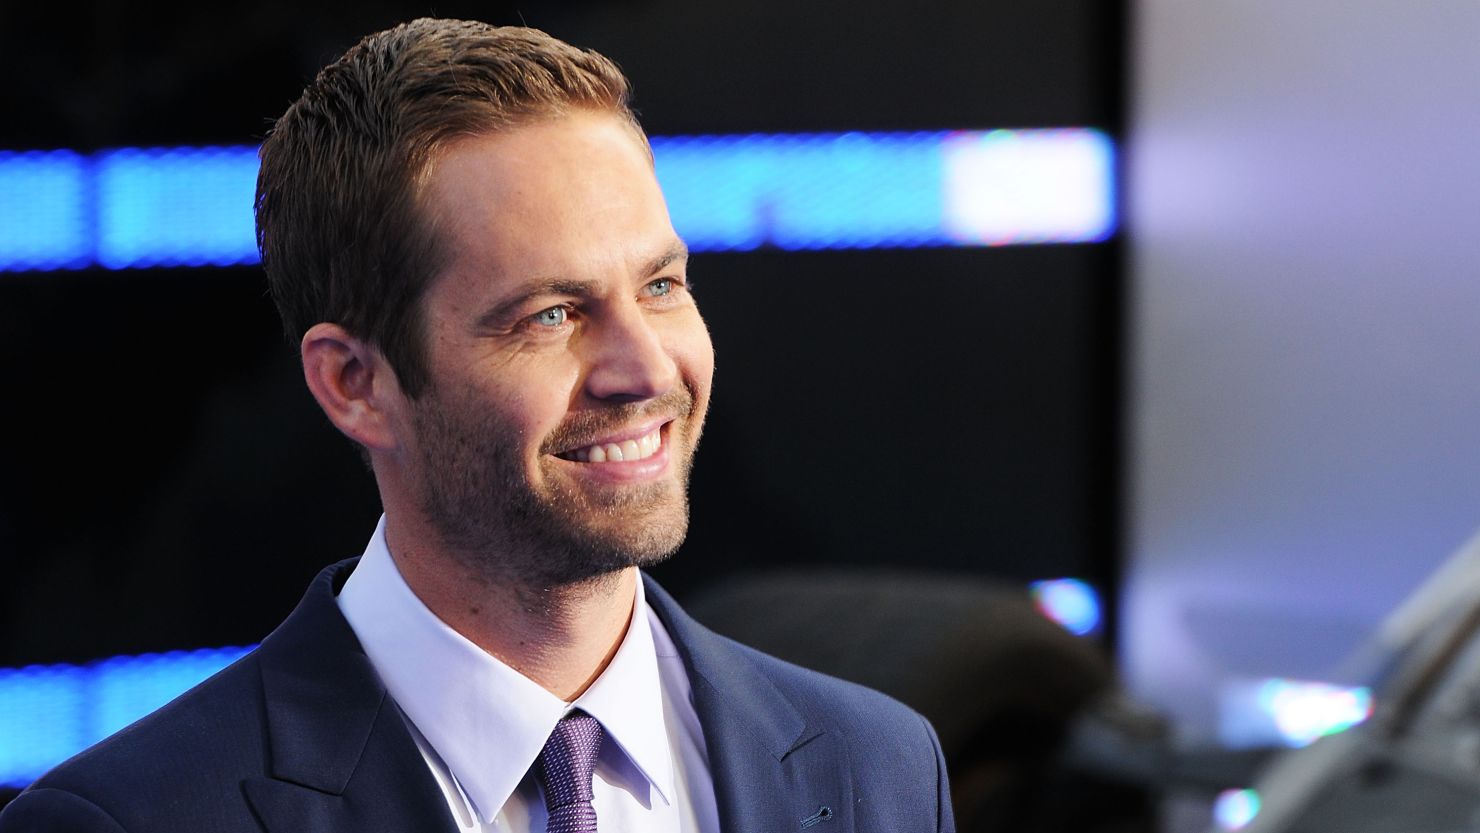 Paul Walker at the world premiere of "Fast & Furious 6" at Empire Leicester Square in May 2013 in London.